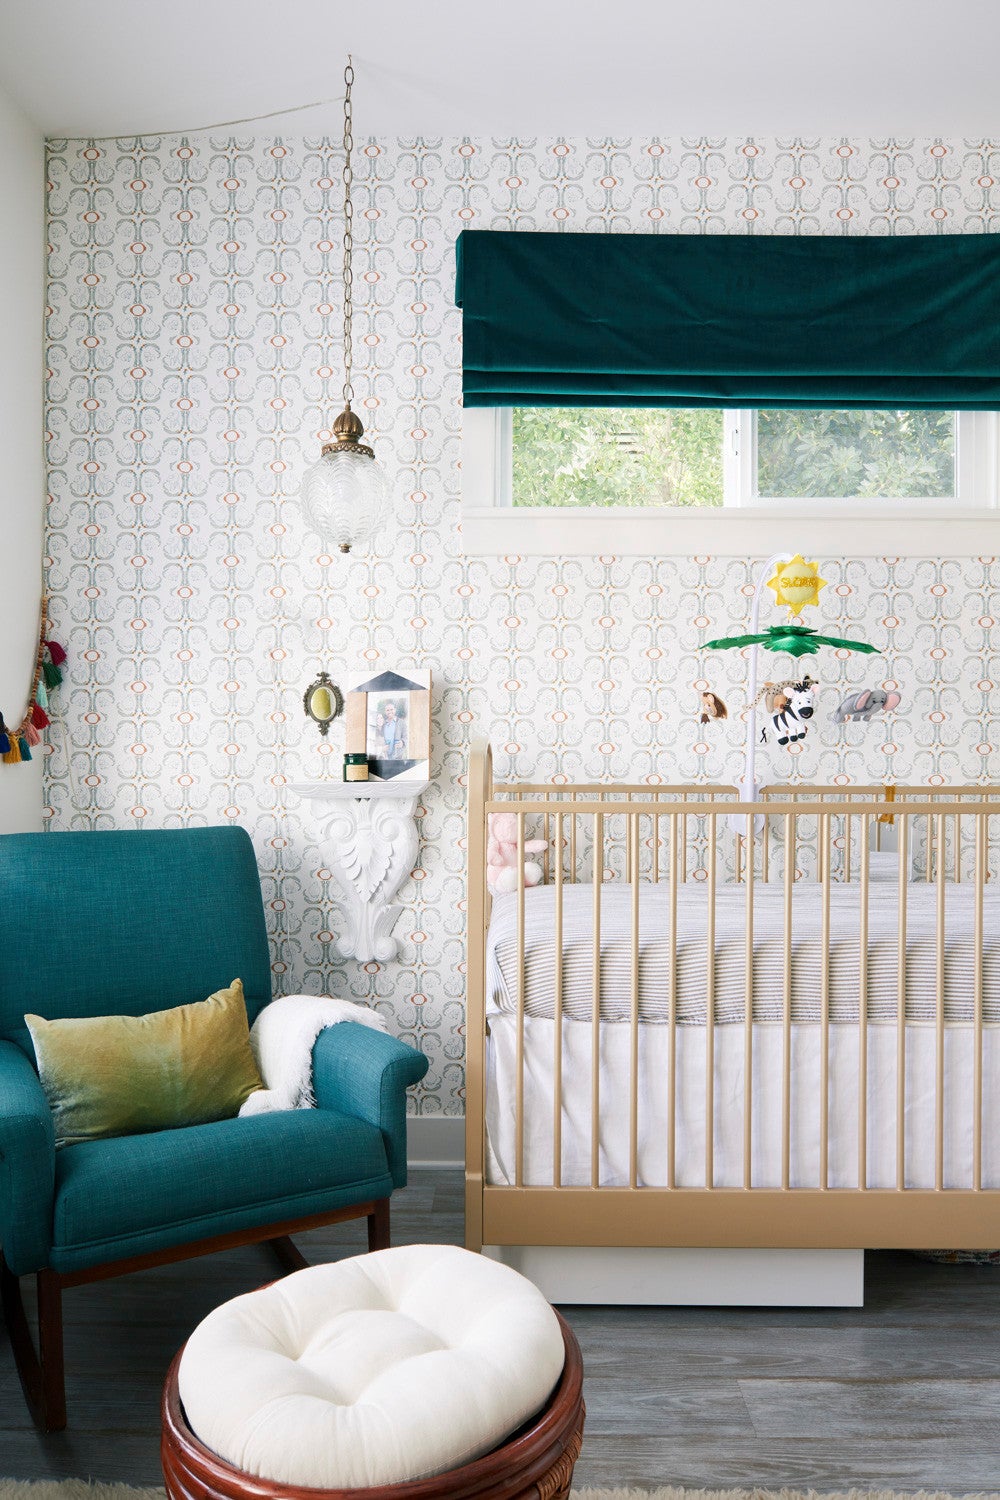 This Designer Renovated a 100-Year-Old Home While Pregnant